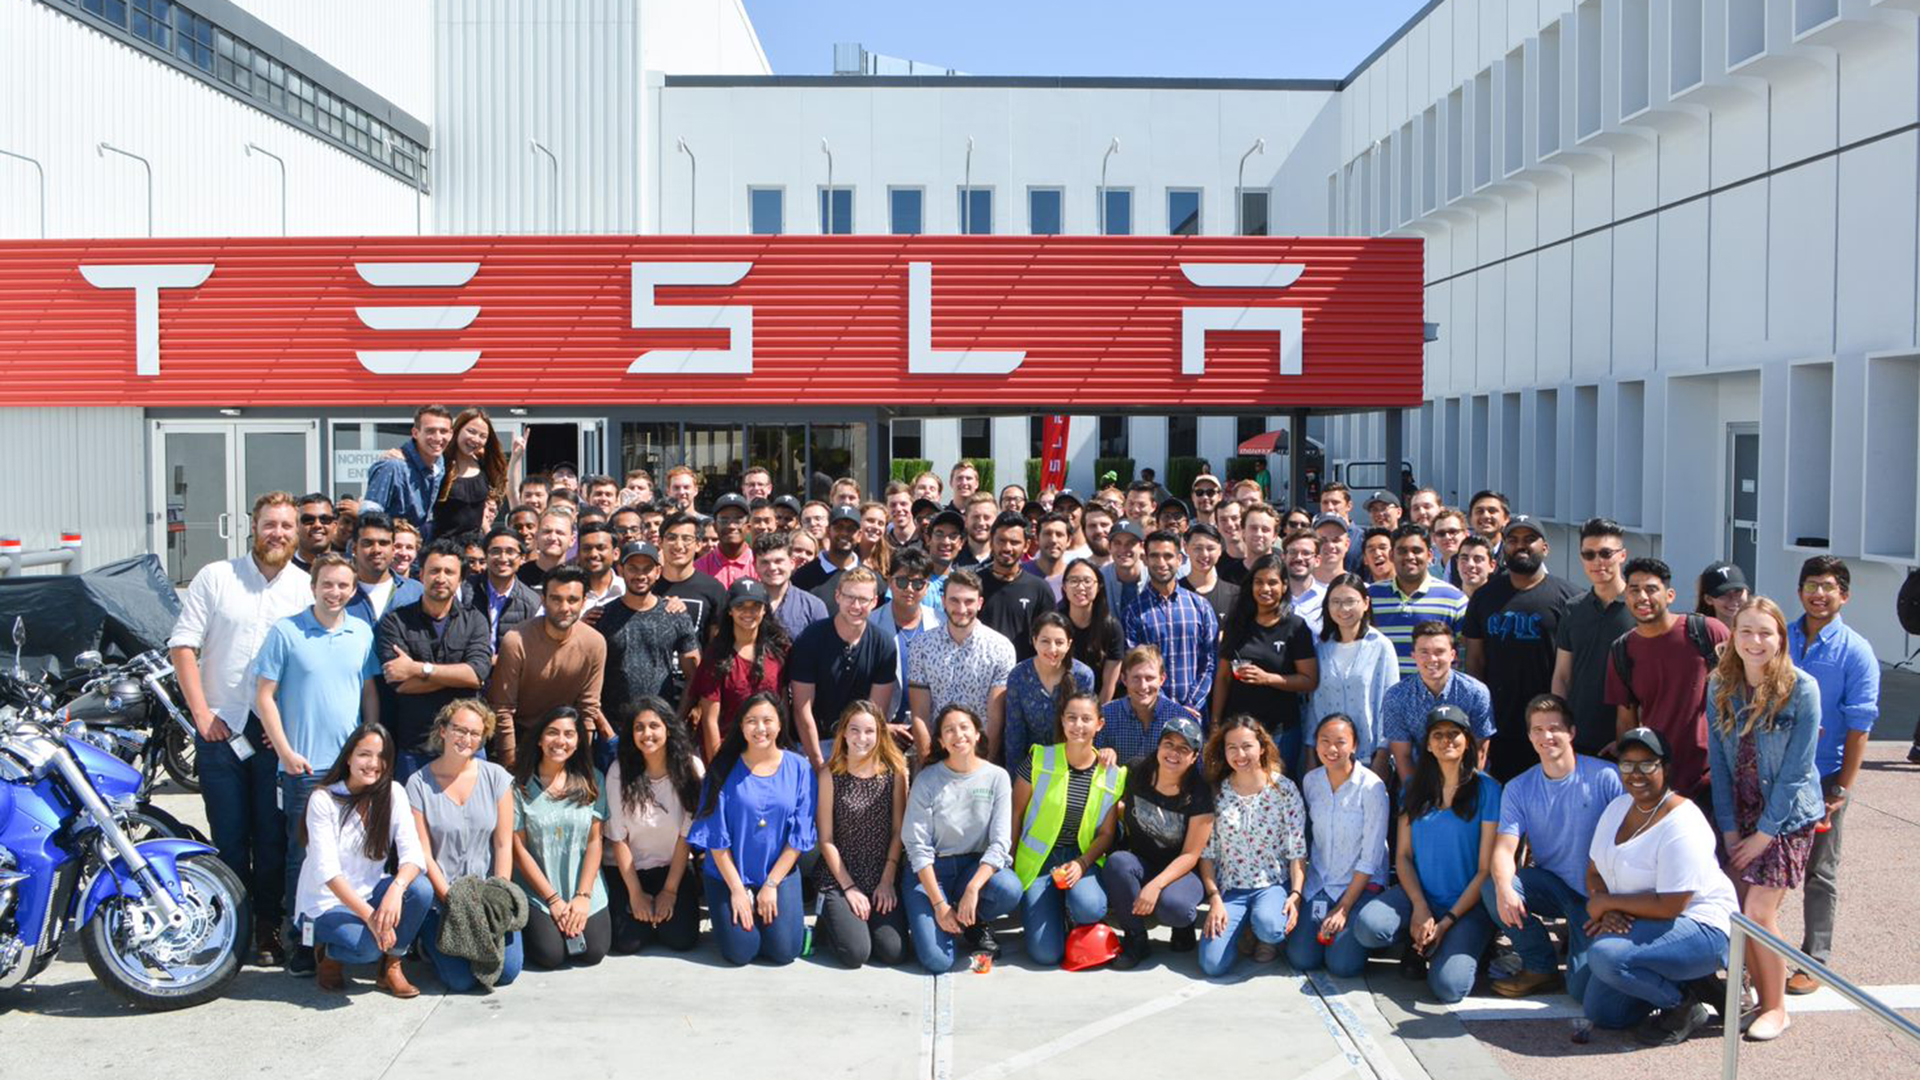 Tesla Canceled Internships Just Before a Week of the Start Date As per Student’s Claim